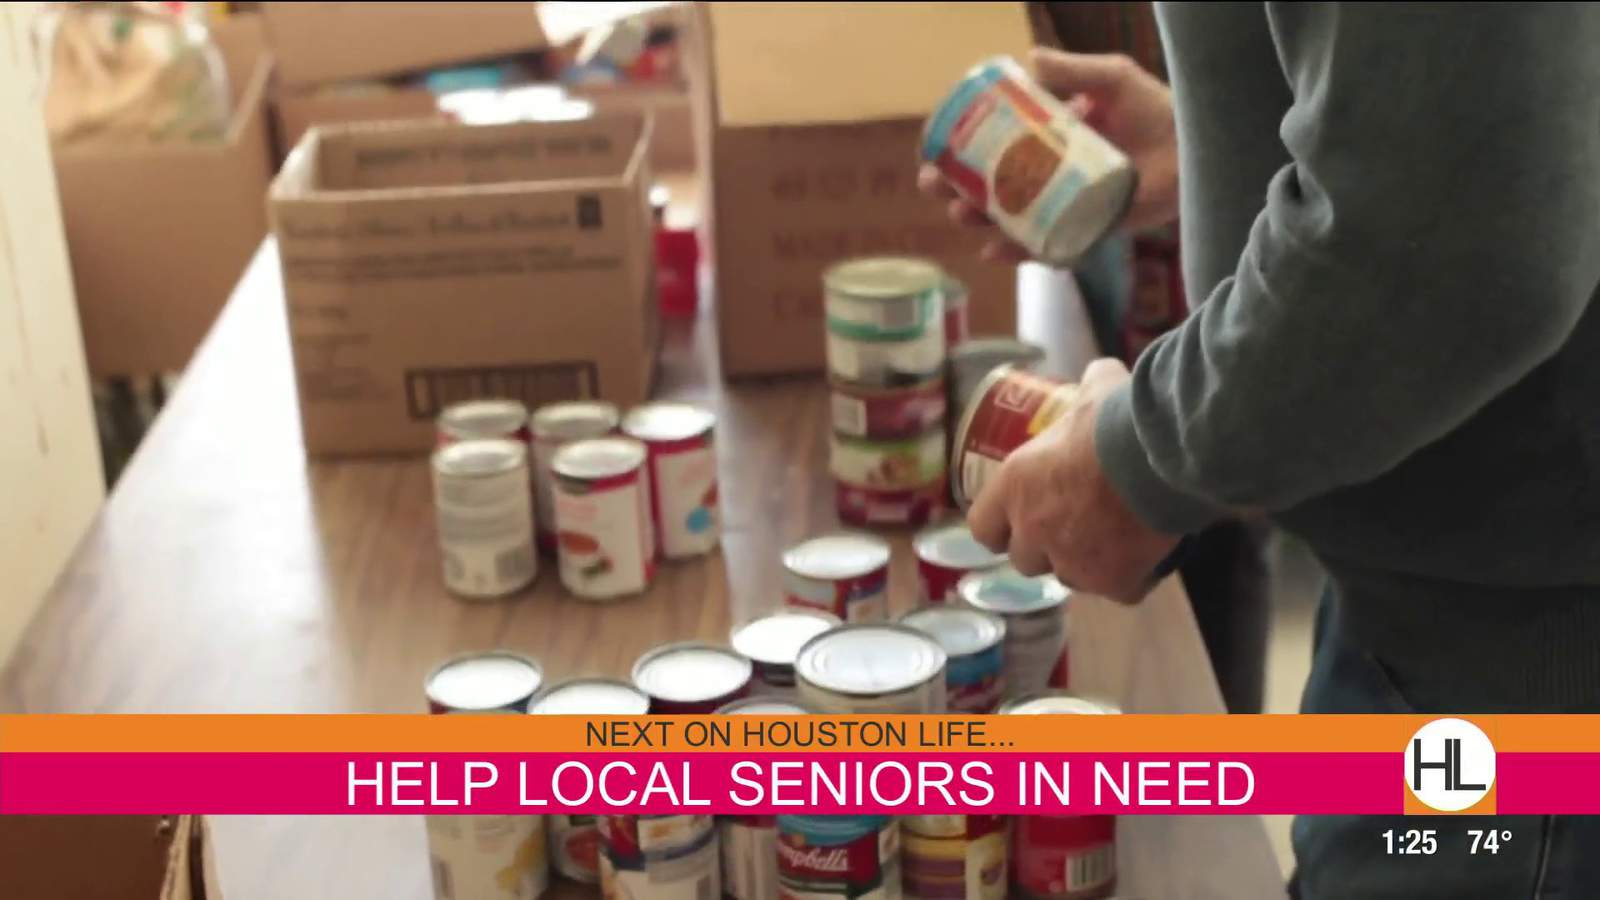 Help local seniors in need by donating essentials at Houston-area Kroger stores